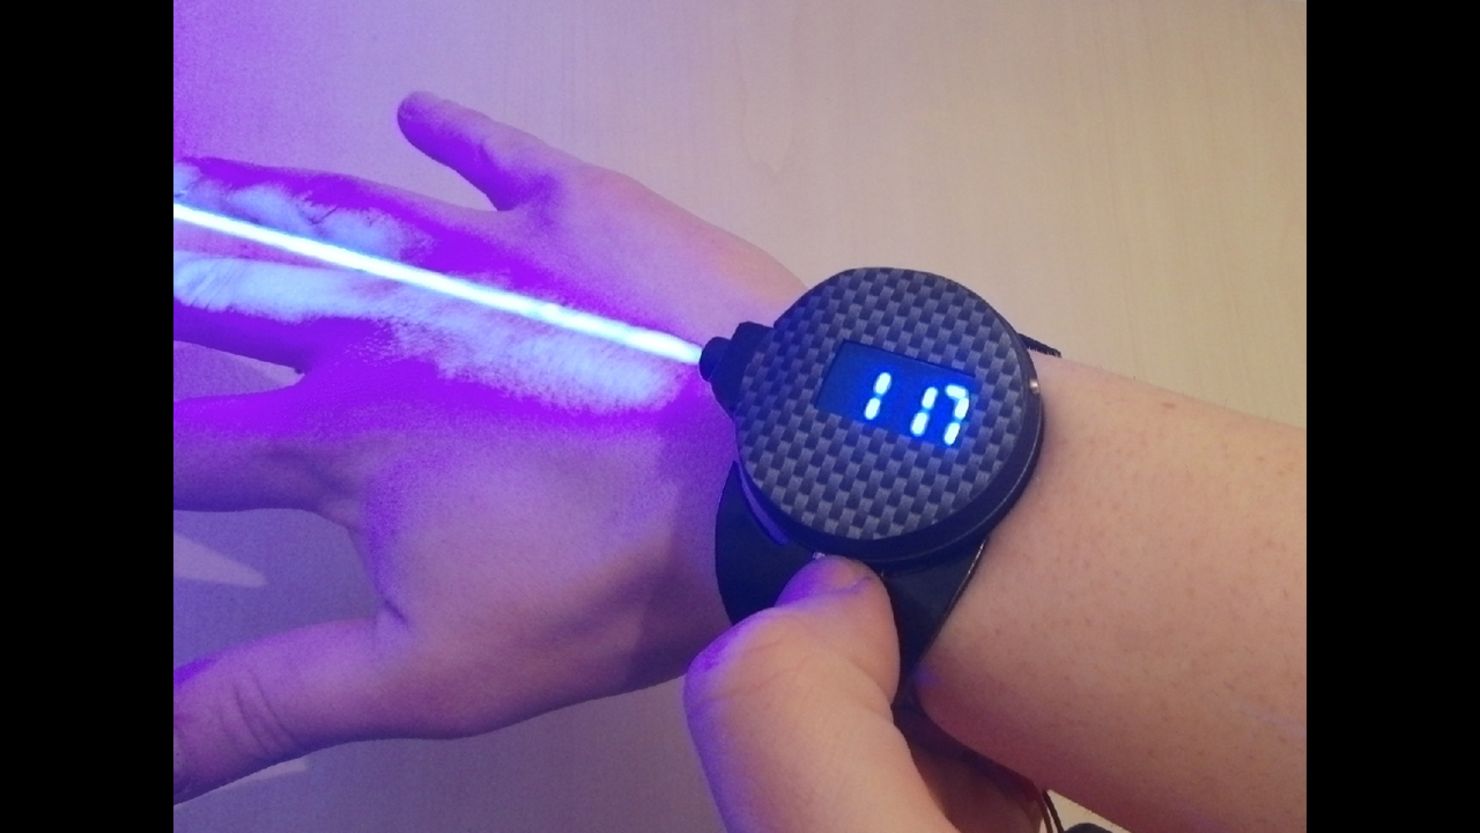 Patrick Priebe's laser watch will pop balloons and burn through plastic.